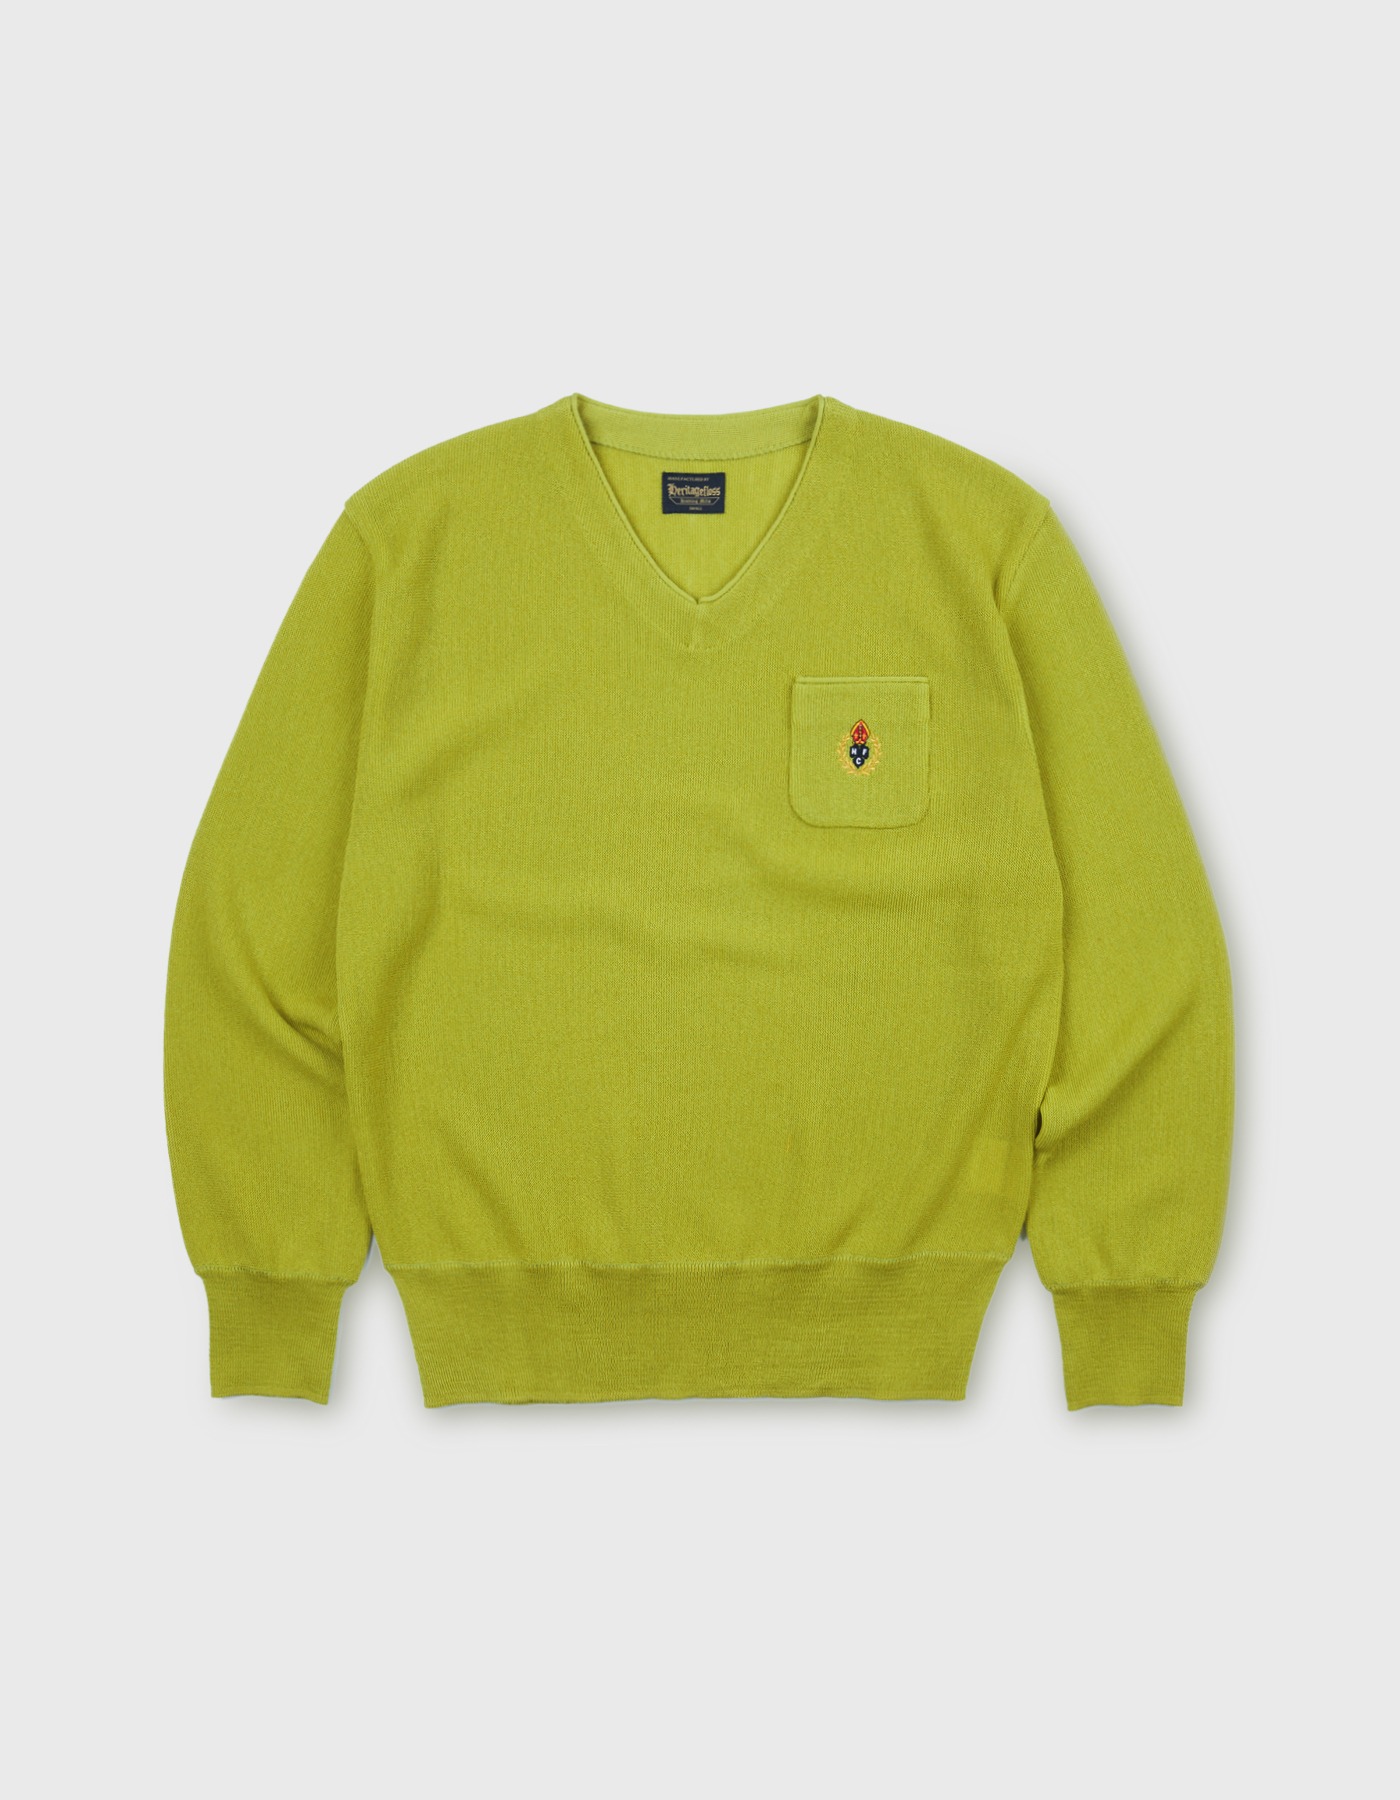 HFC CREST WOOL V-NECK SWEATER / Yellow Green